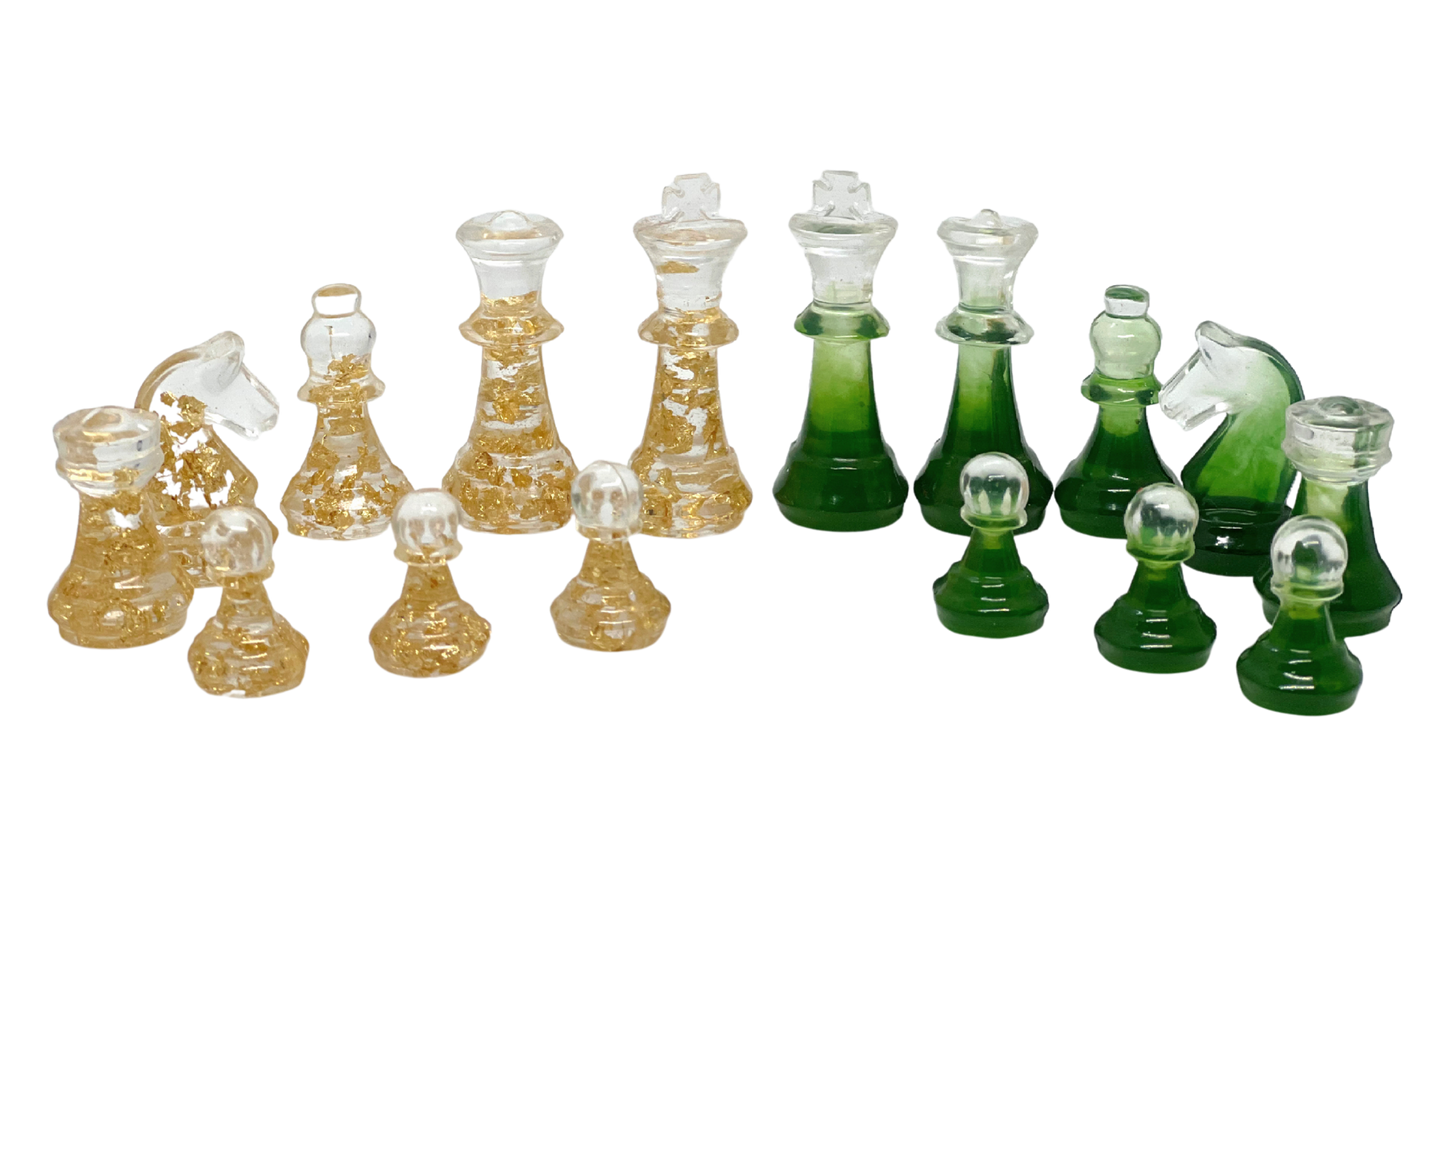 Customizable  Liveliness Resin Handmade Chess Board by Nature's Art Lab